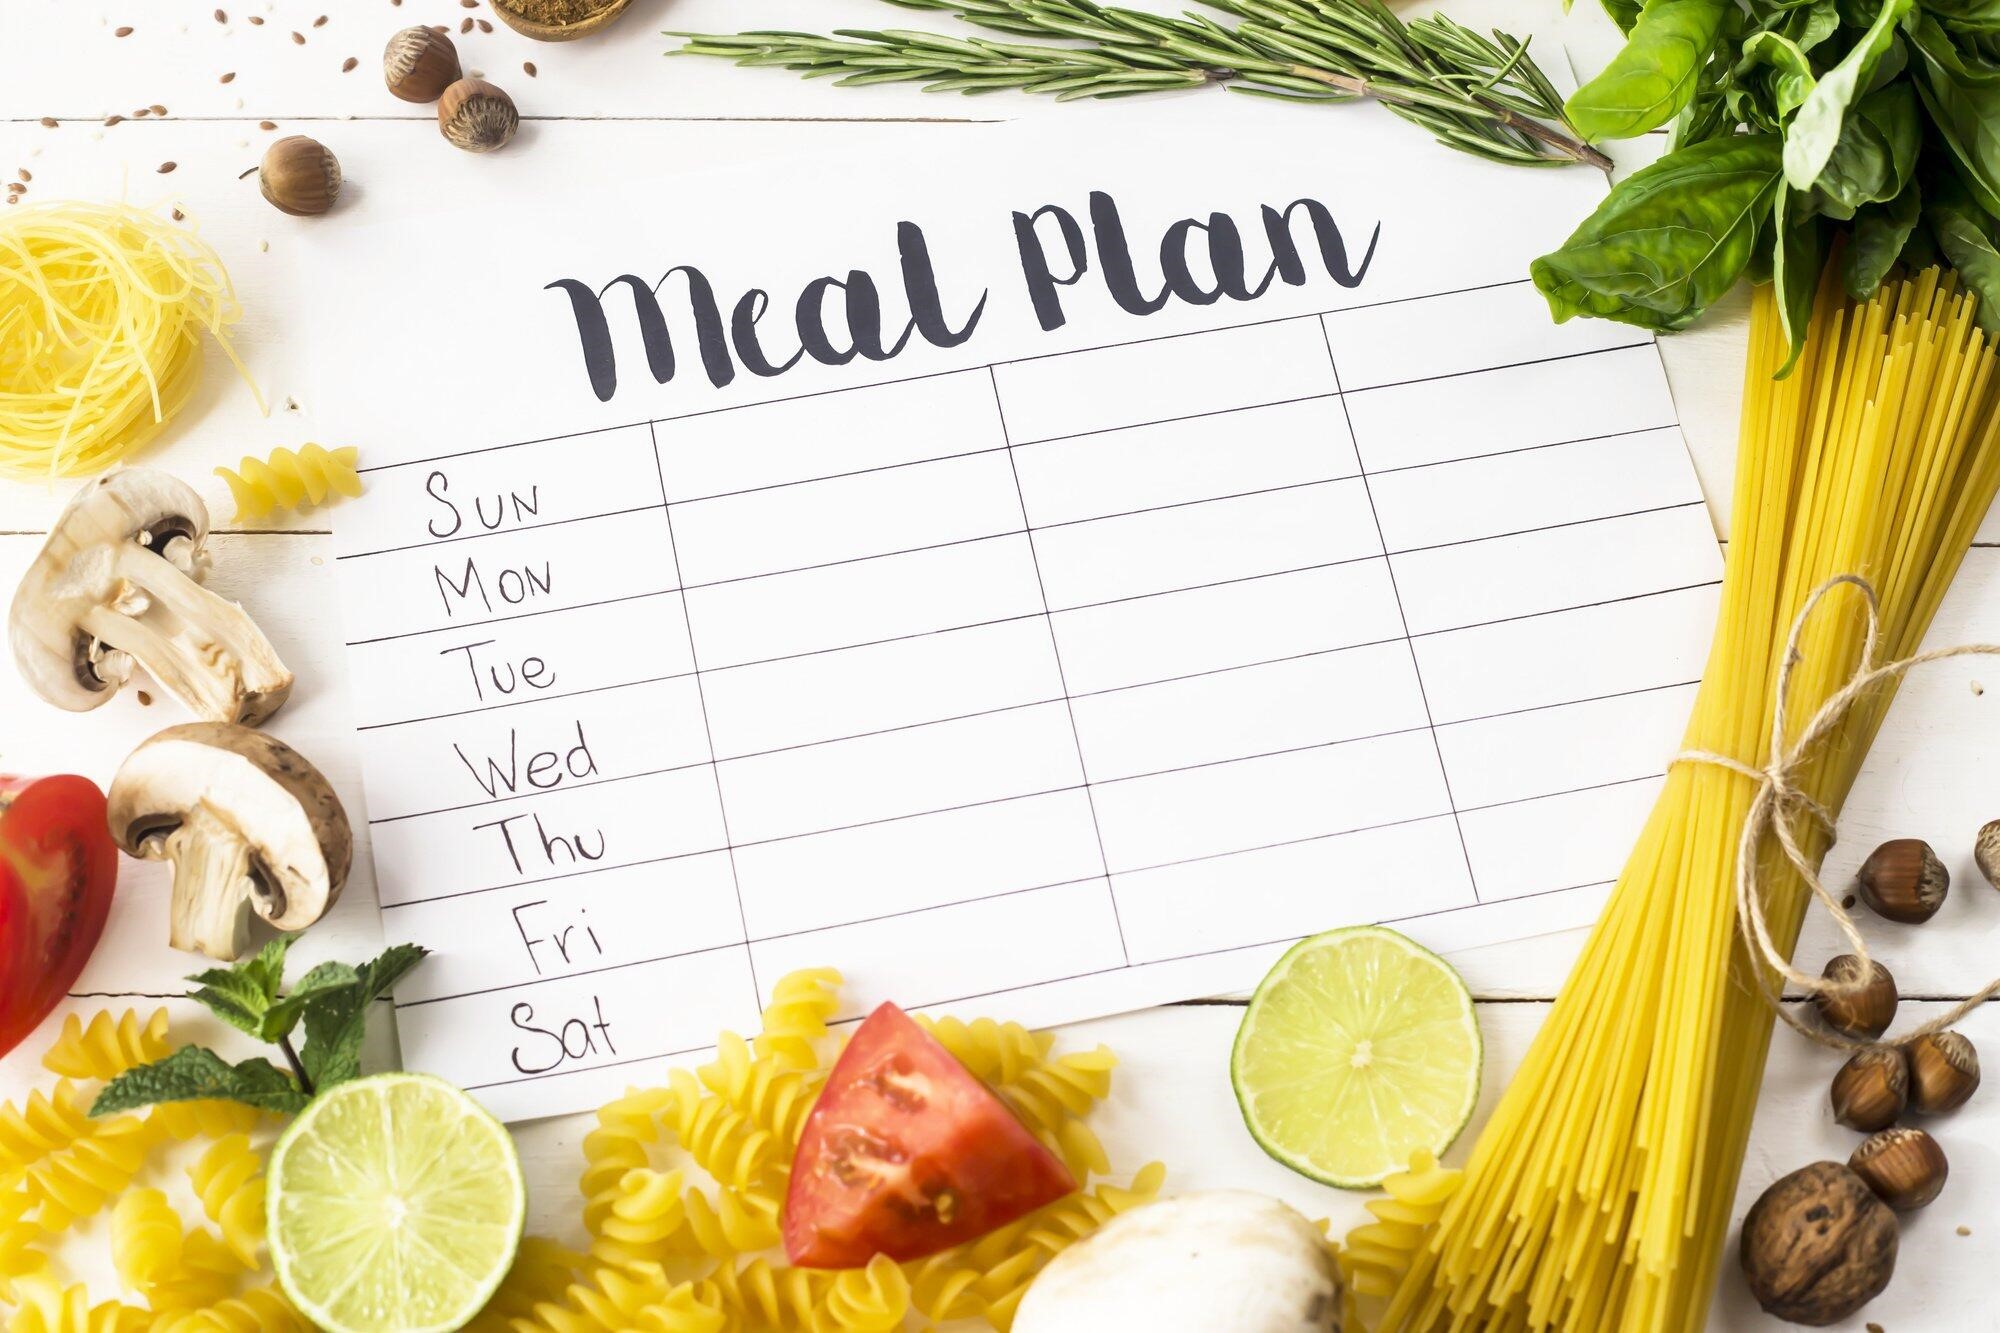 A Complete Weekly Family Meal Plan for Busy Weekdays